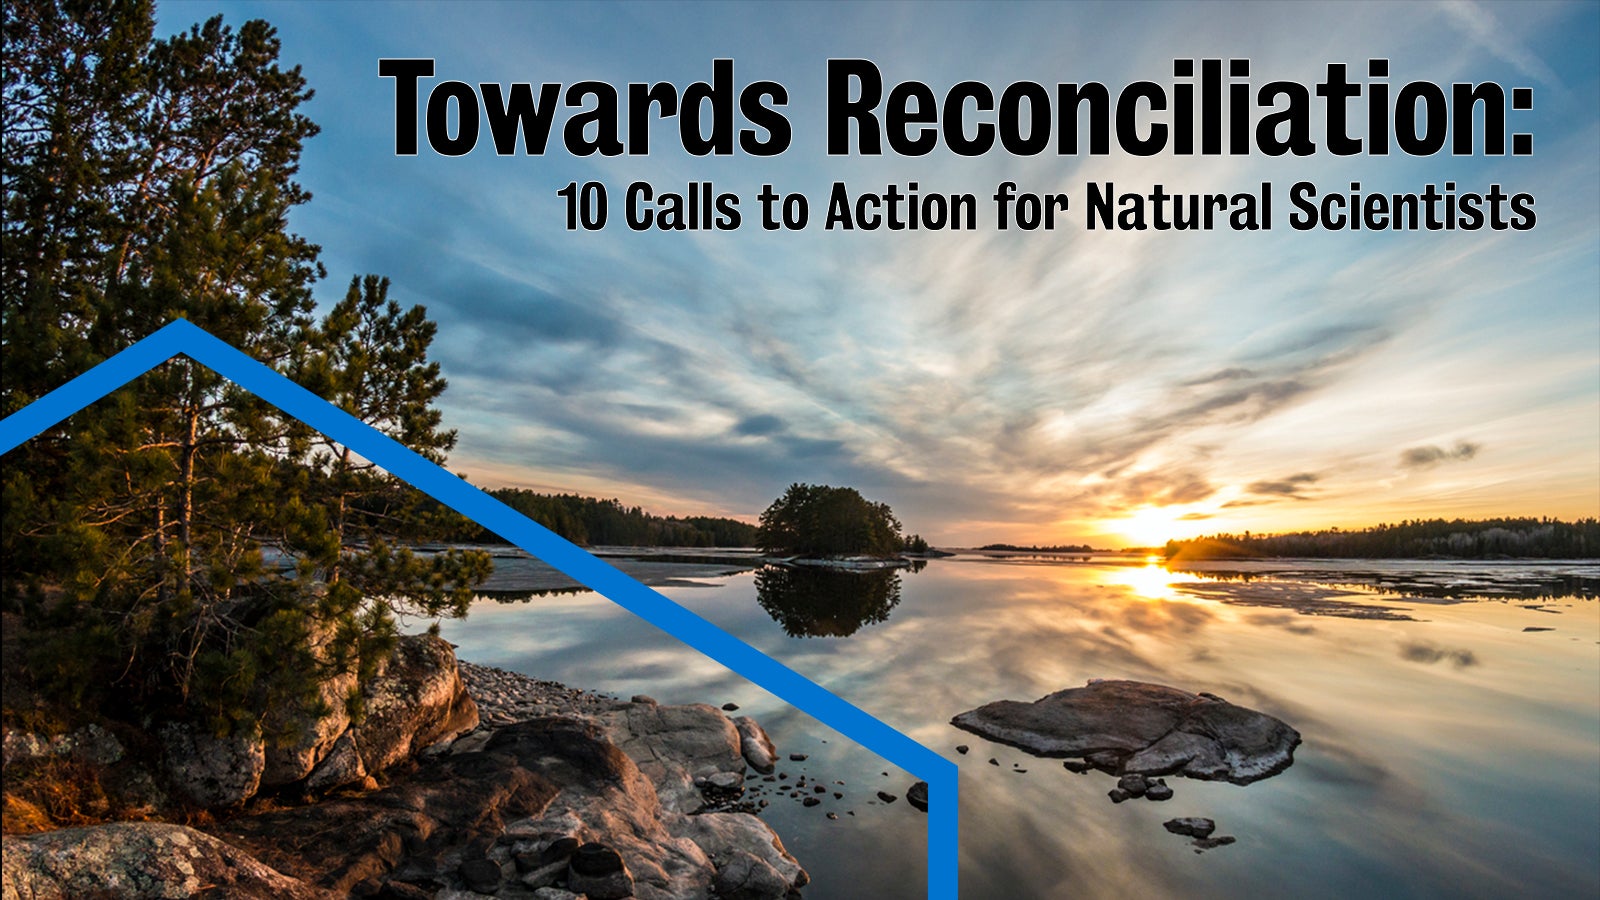 Towards Reconciliation: 10 Calls to Action for Natural Scientists. Background image: sunrise over a lake